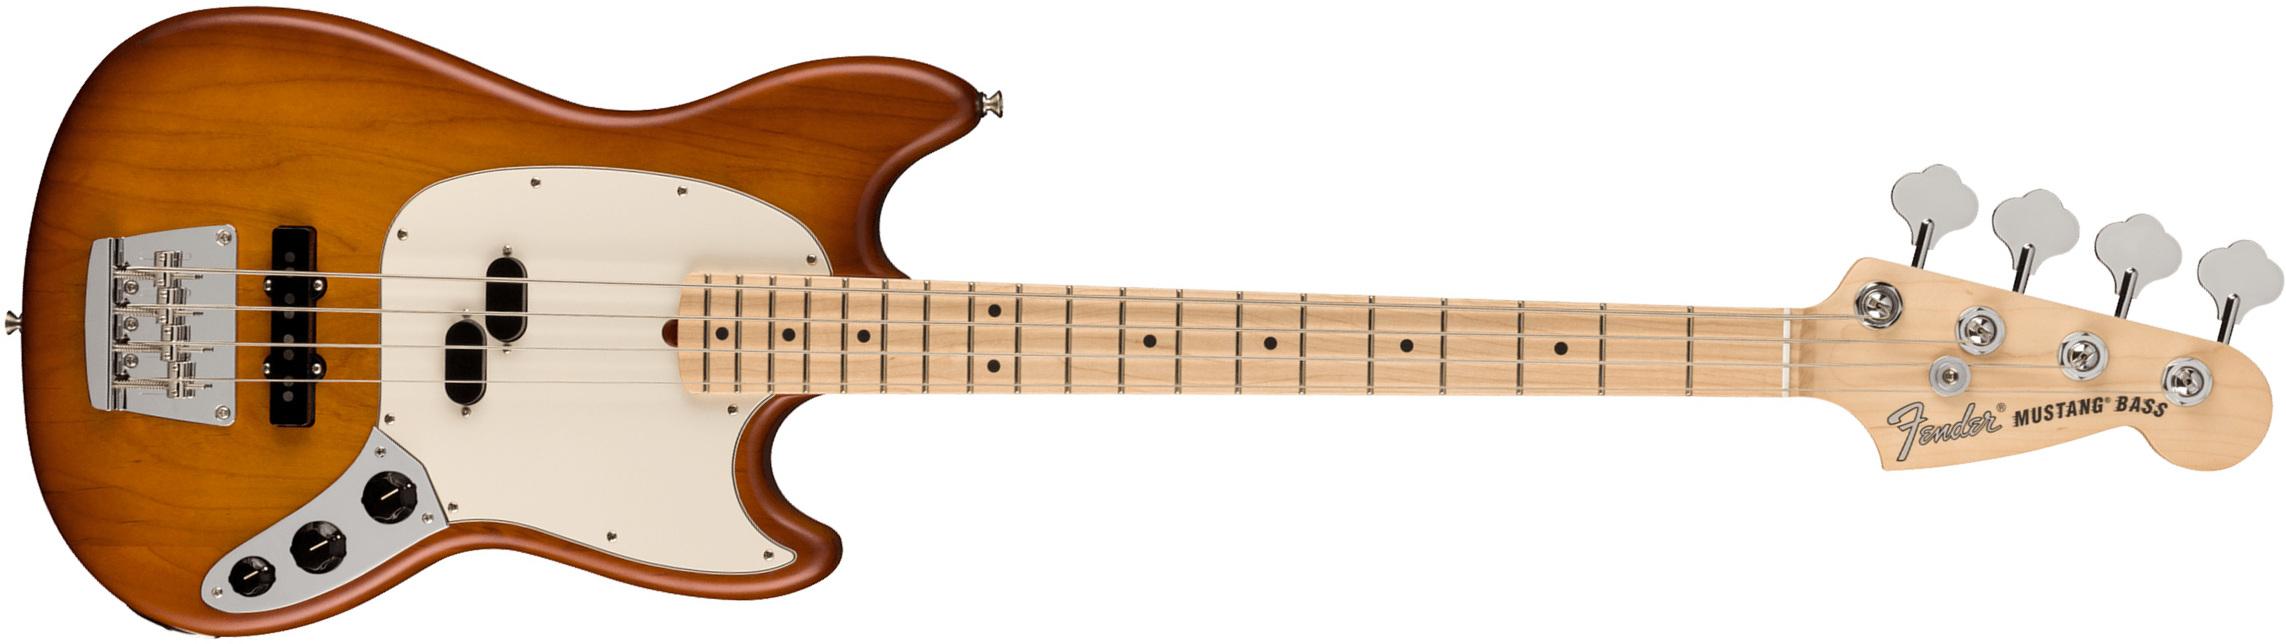 Fender Mustang Bass American Performer Ltd Usa Rw - Honey Burst Satin - Solid body electric bass - Main picture